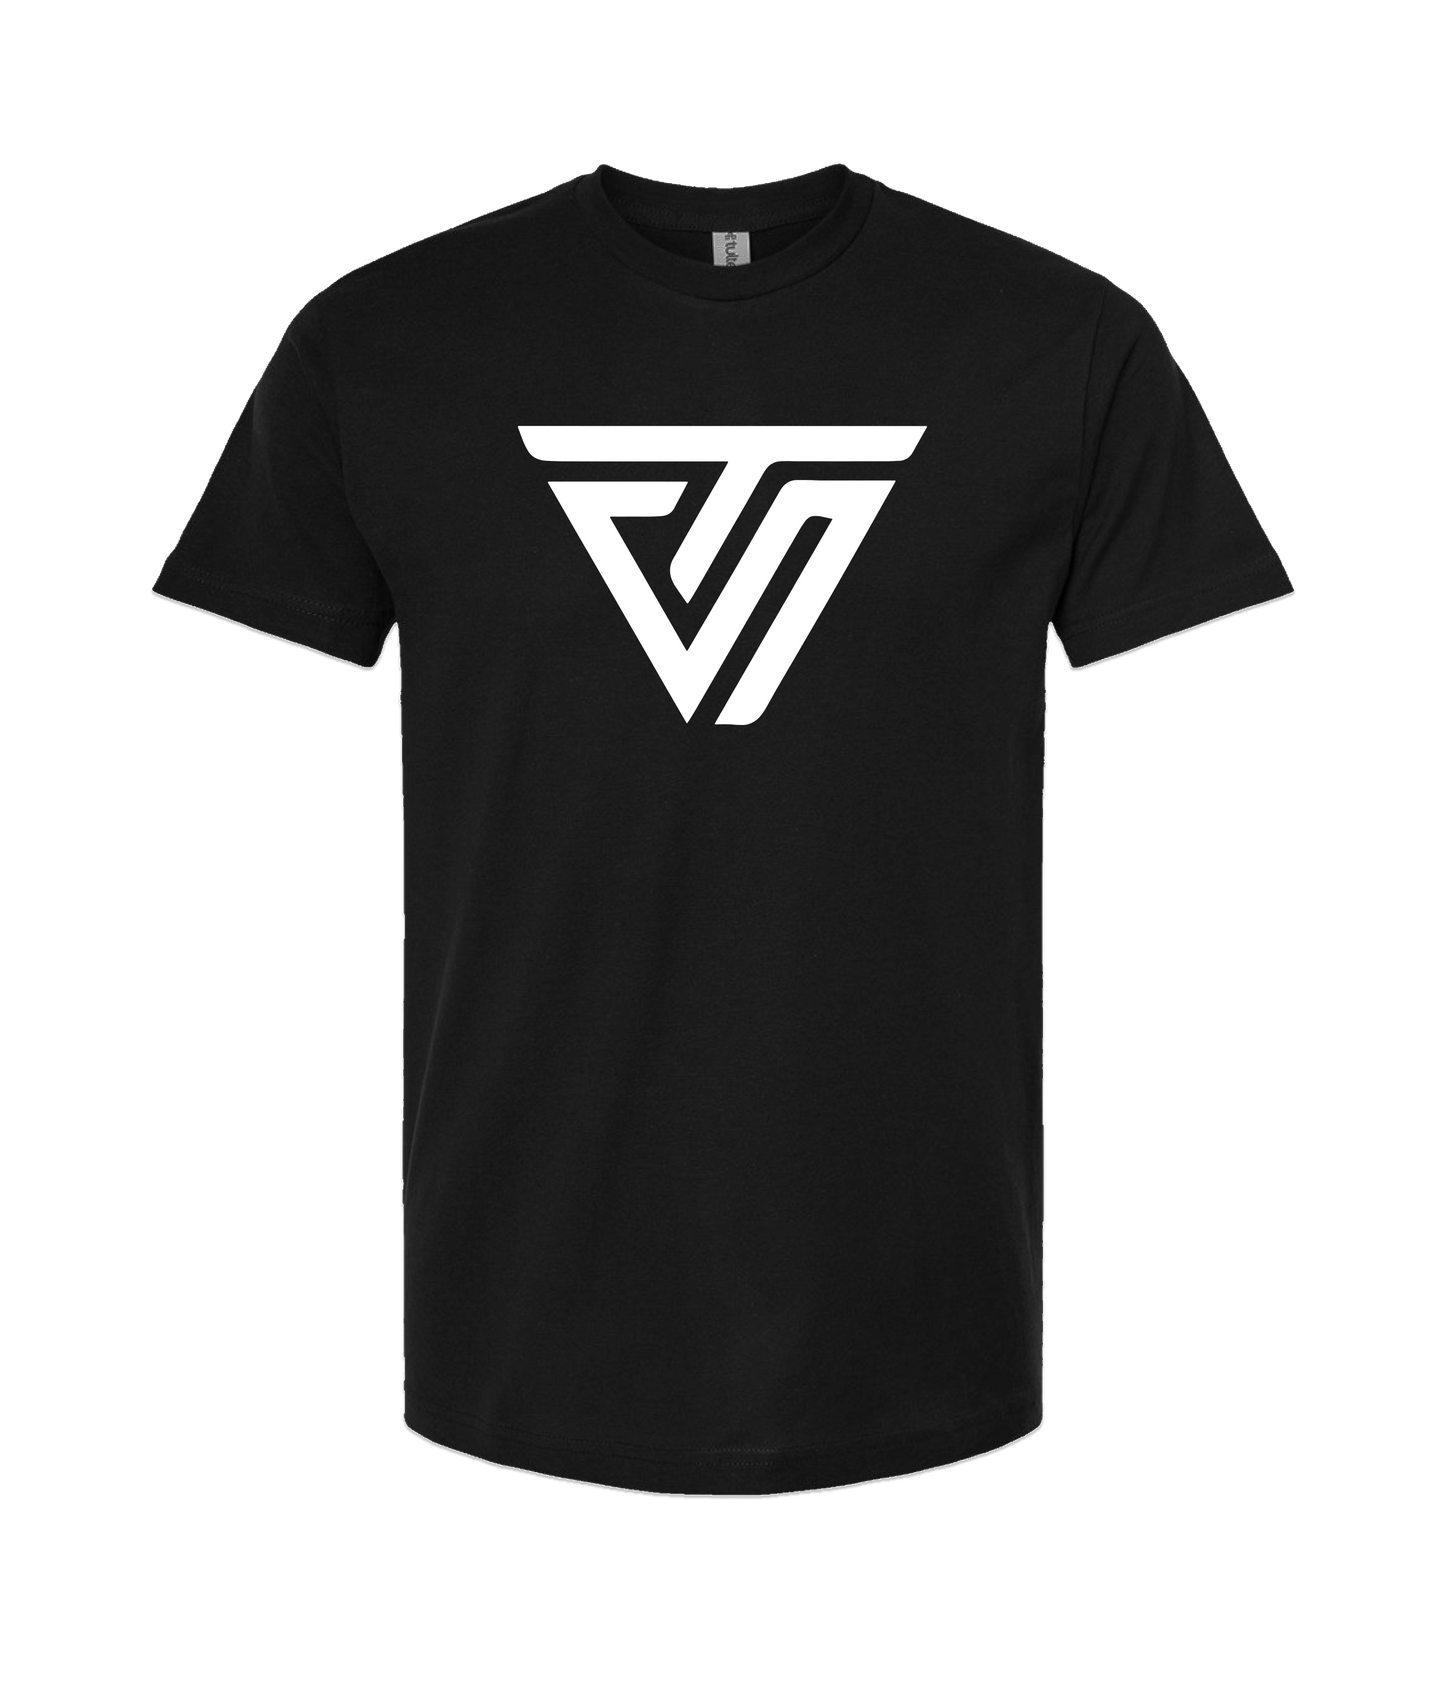 TheShift - The Triangle - Black T-Shirt